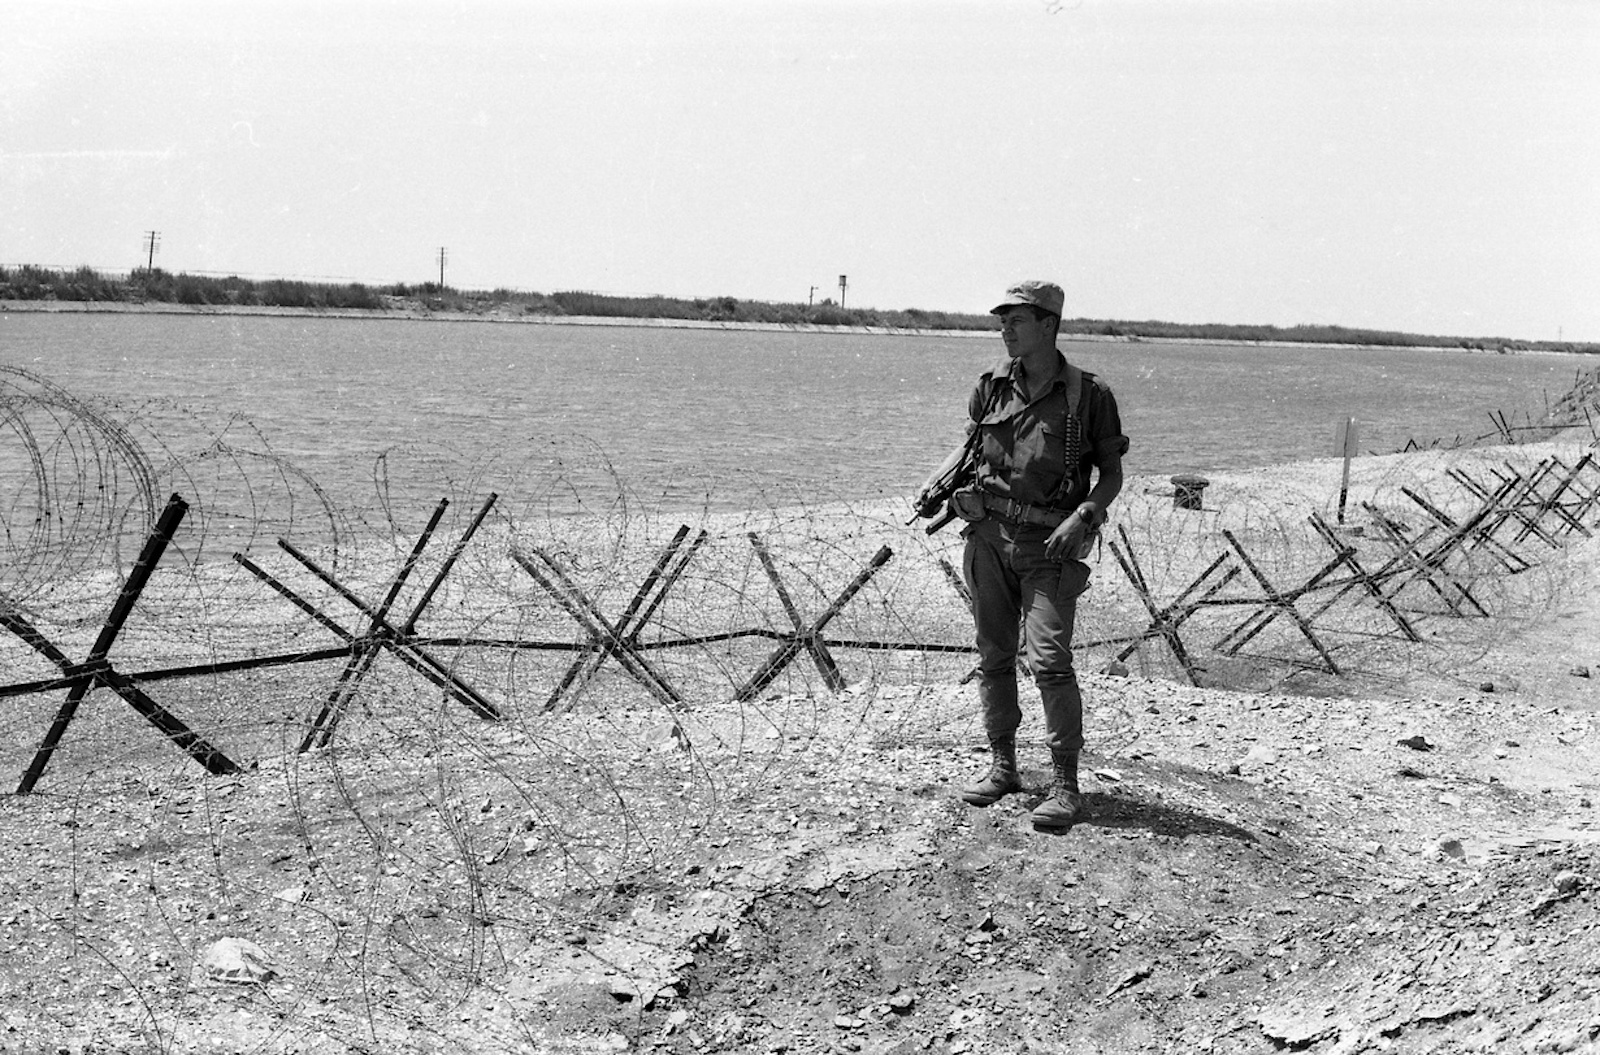 An Israeli soldier stands watch on the Suez Canal, taken from Egypt in the Six Day War, c. 1971. National Library of Israel (CC BY).